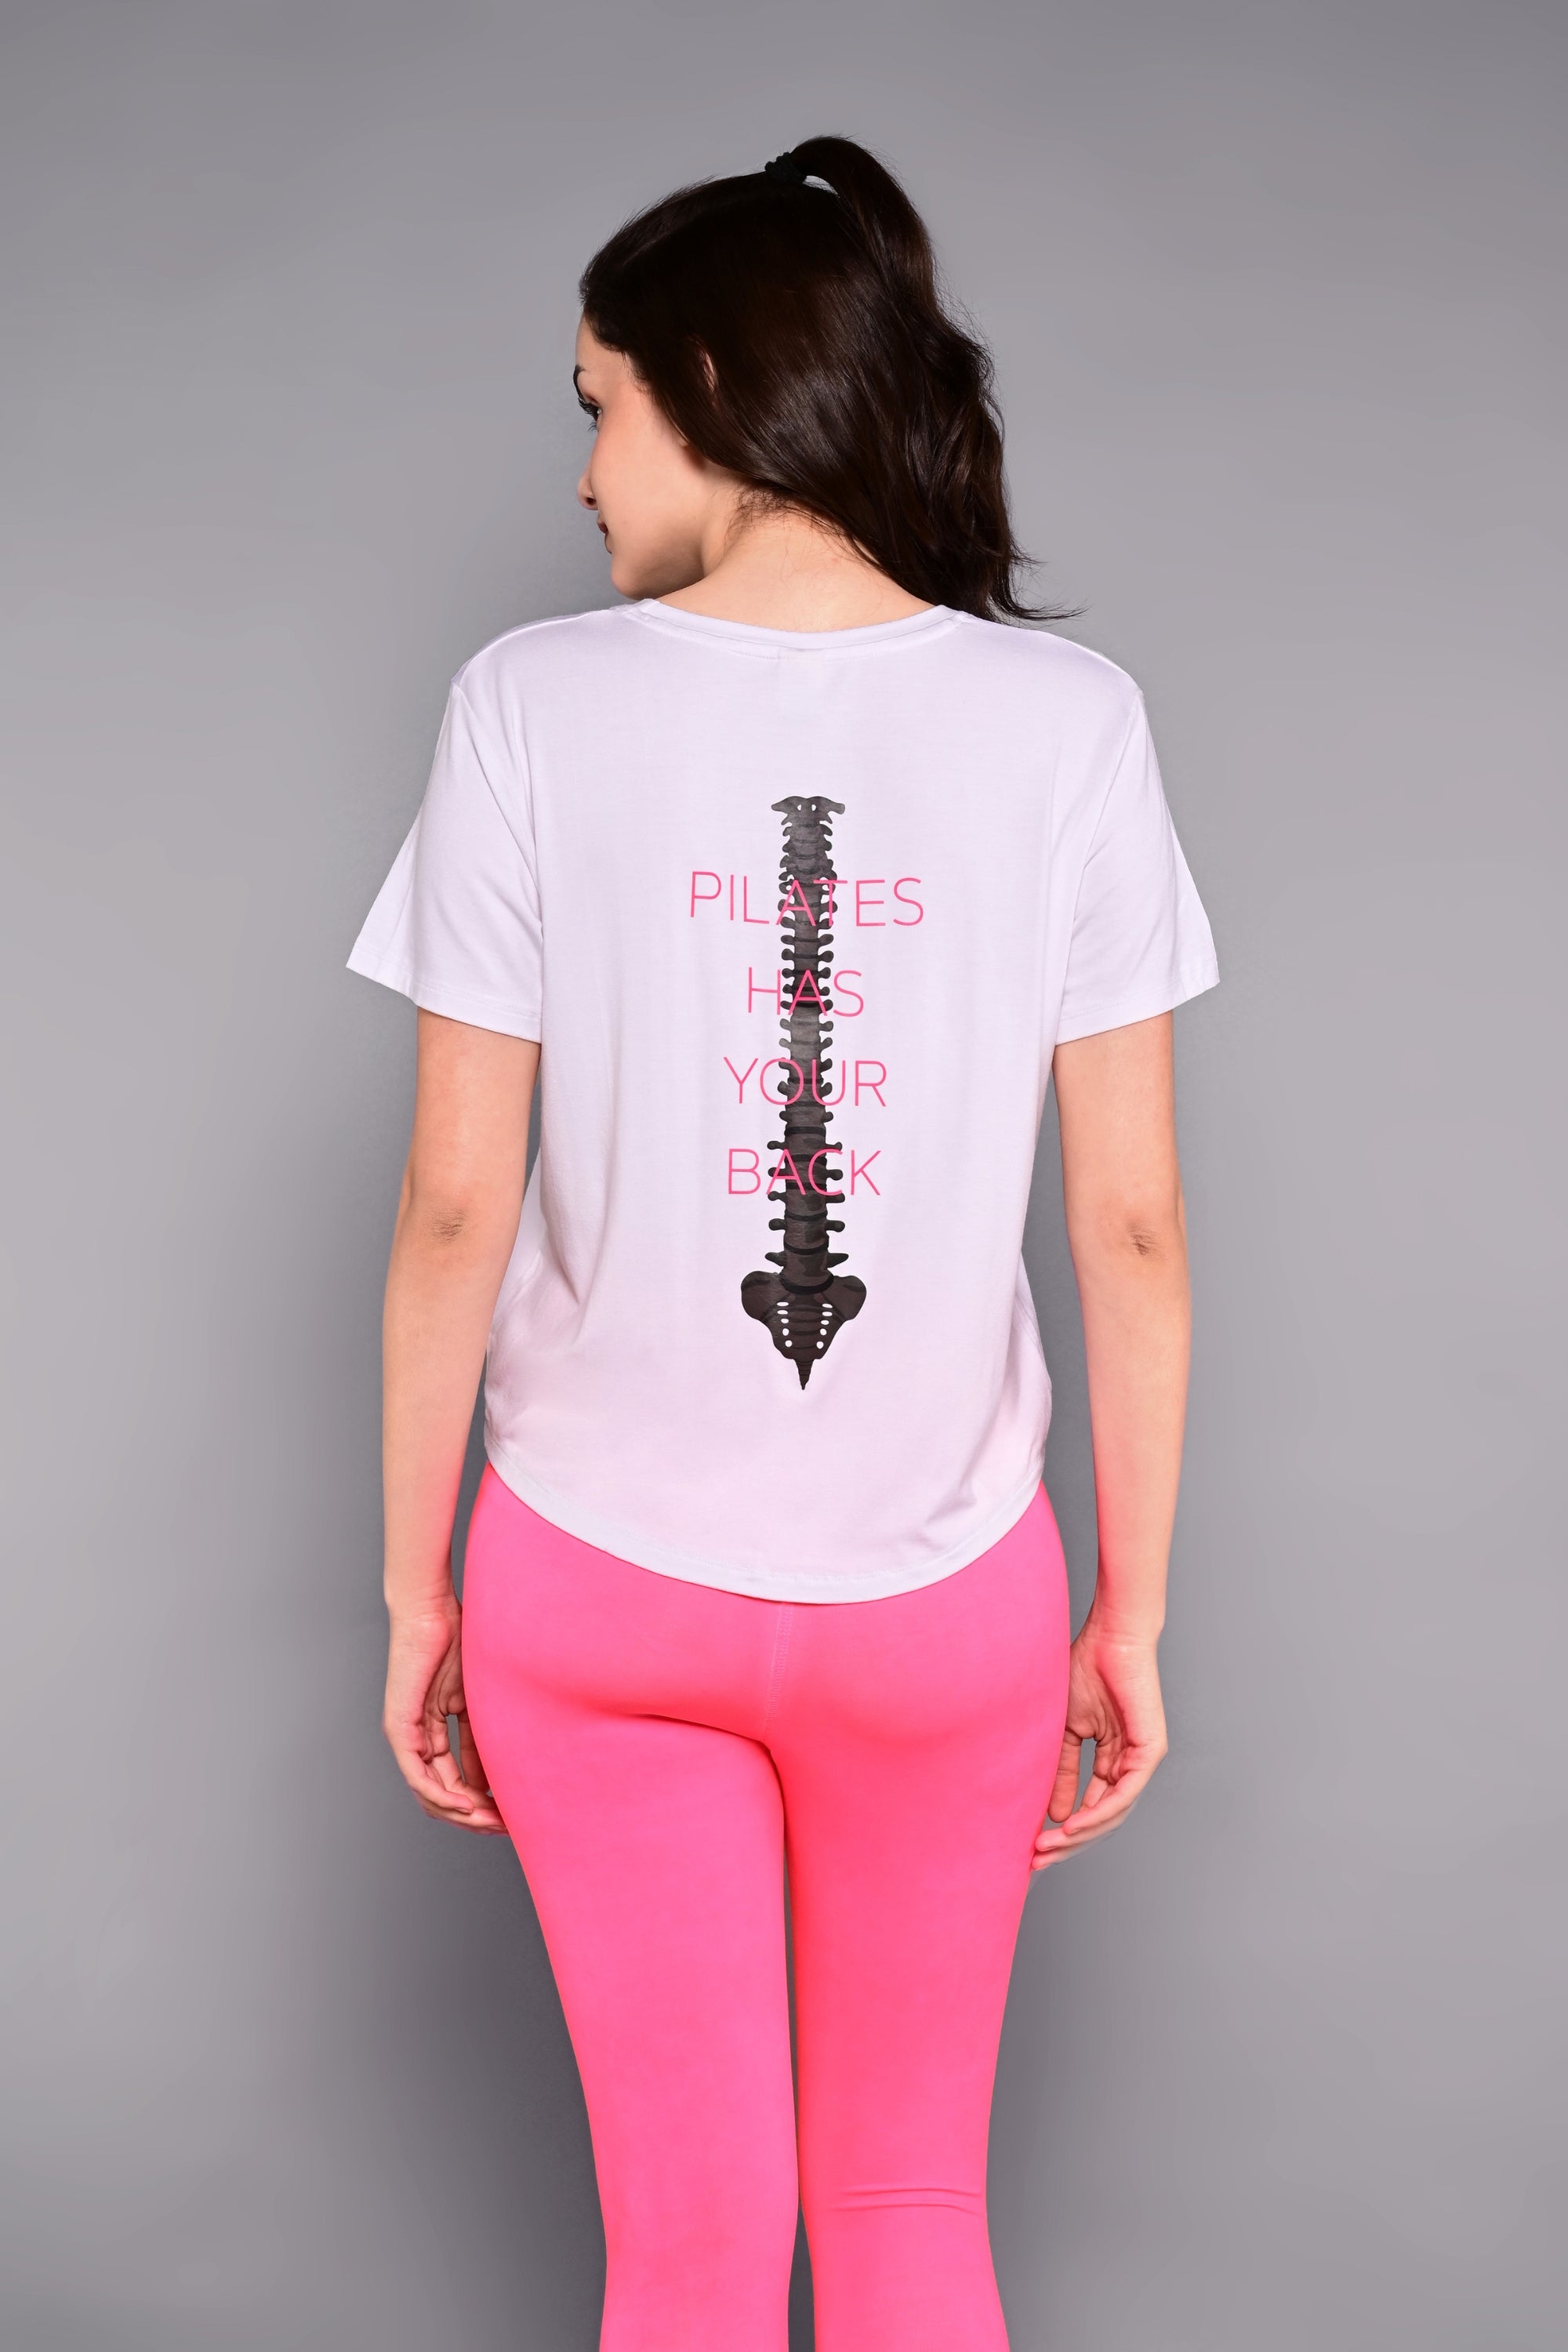 'Pilates Has Your Back' Printed Tee